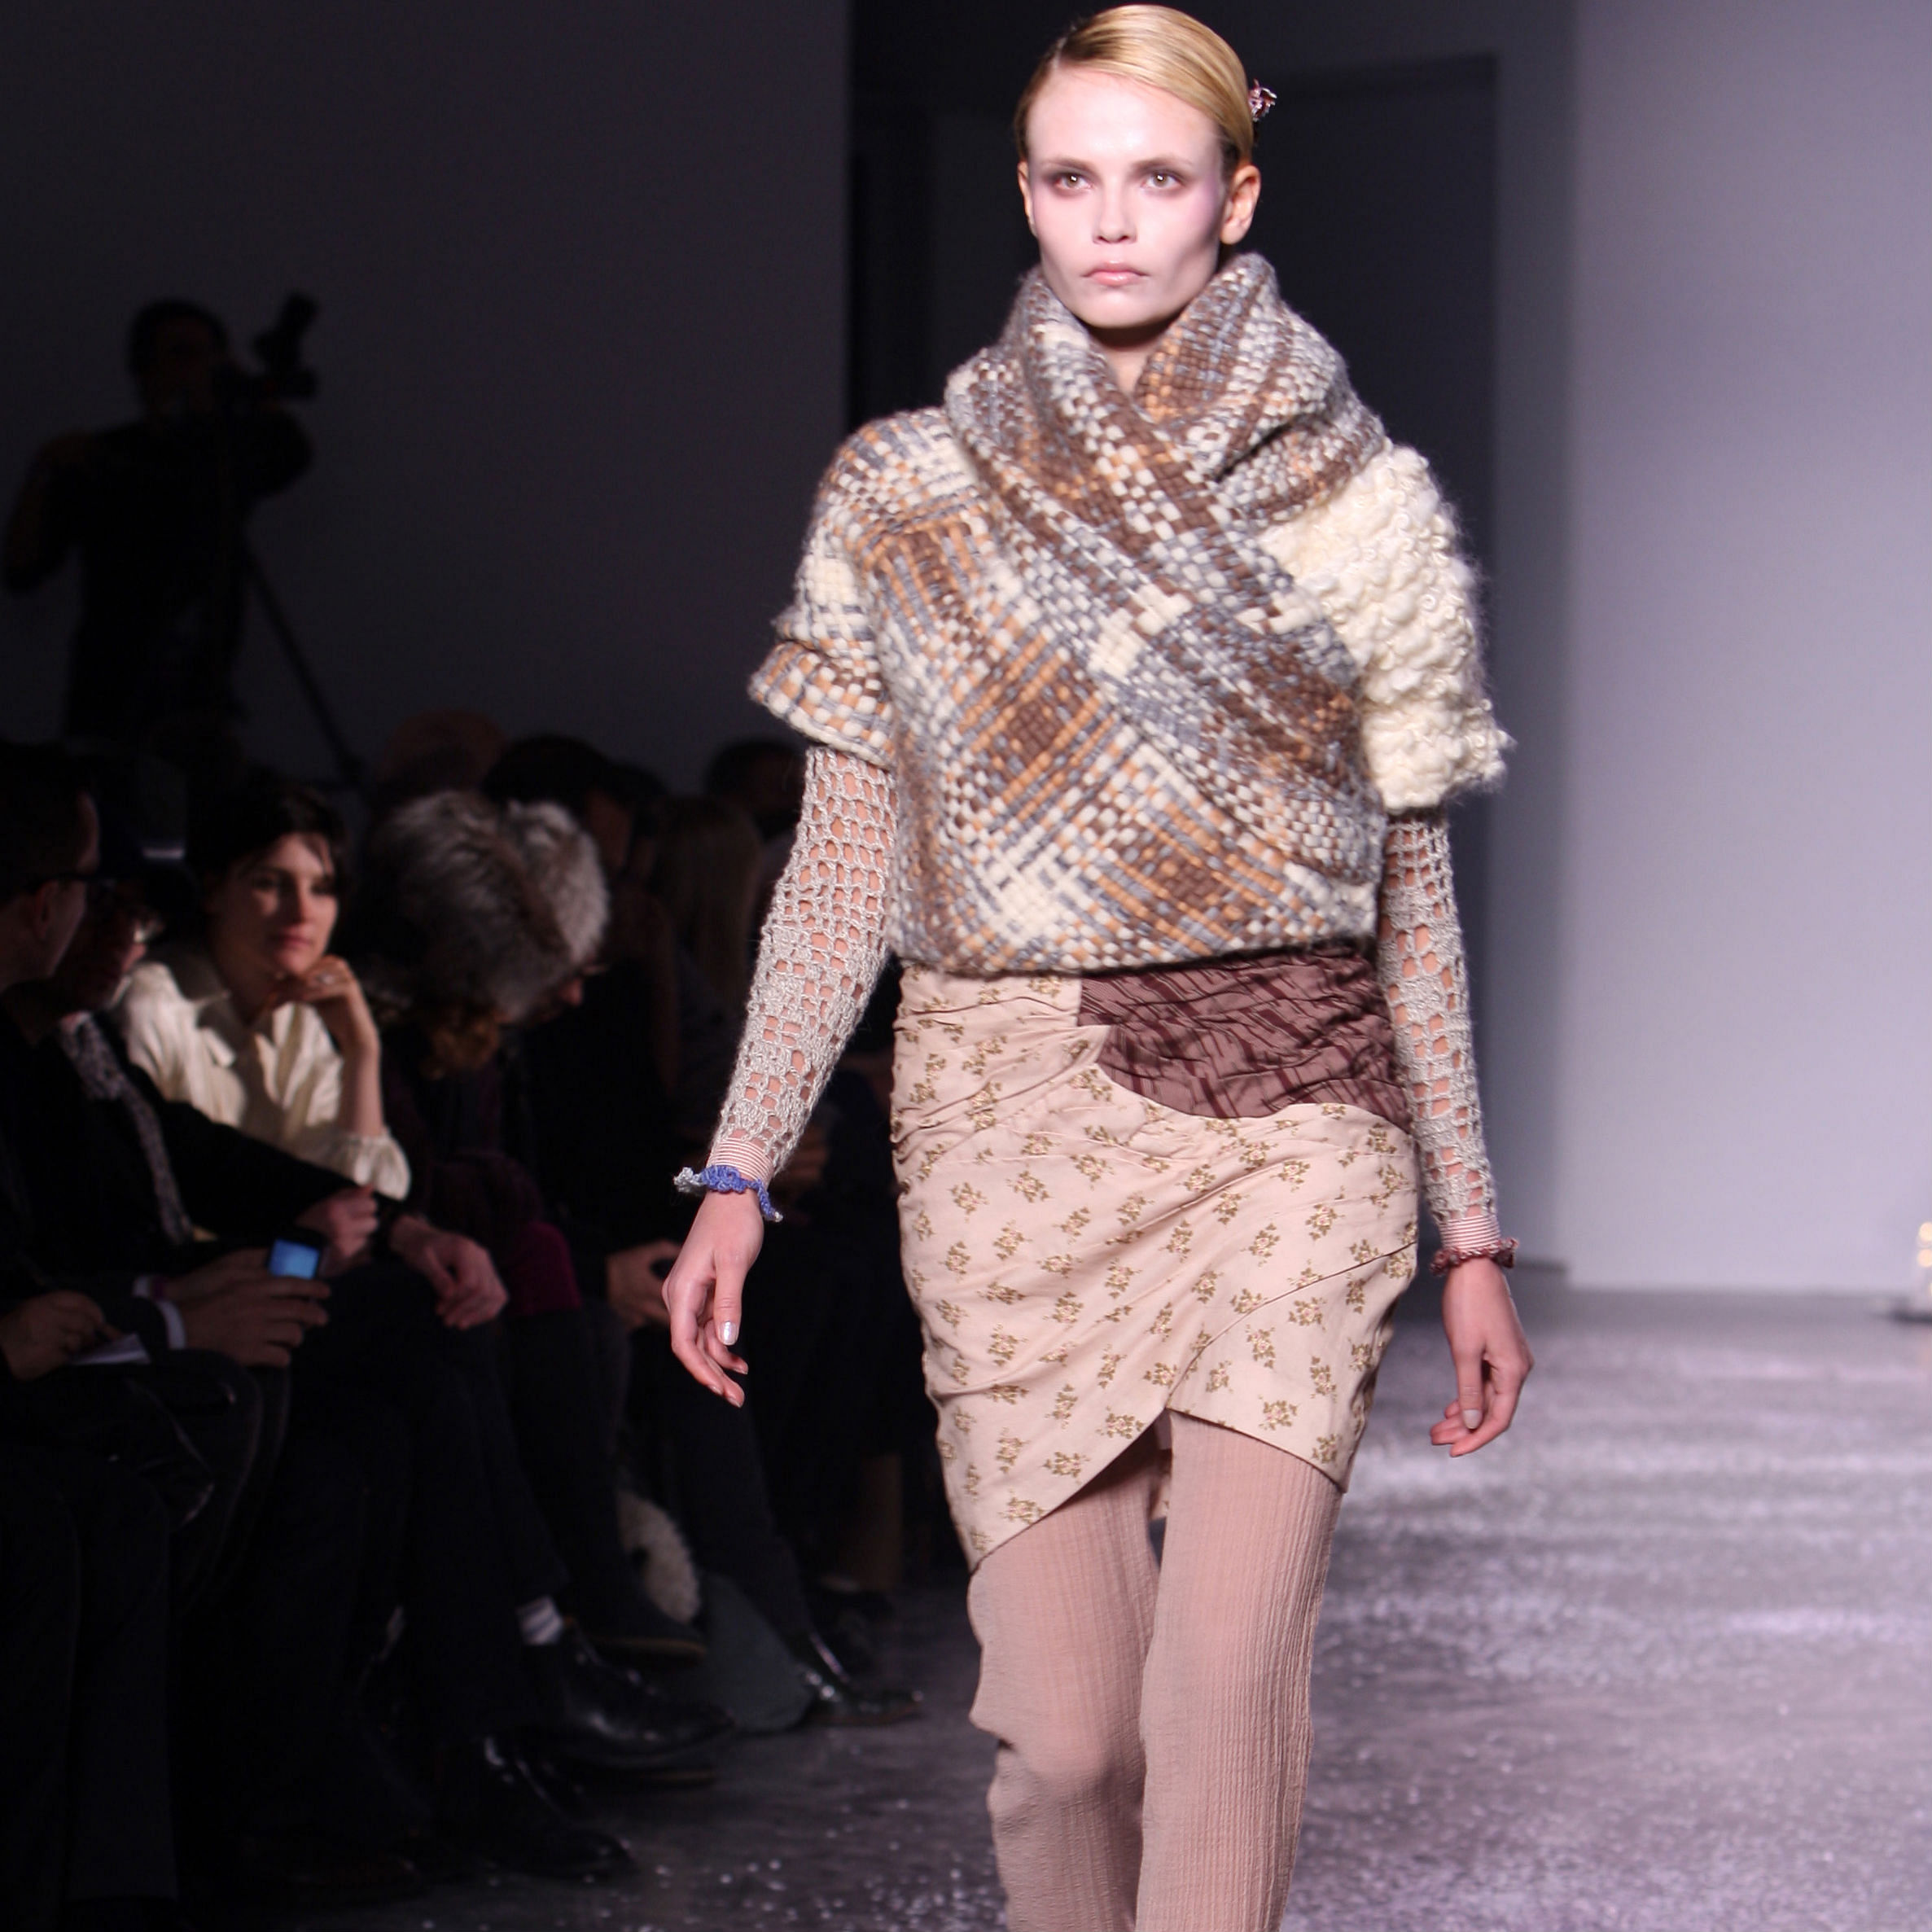 Fashion Trend of the Month: Knitwear